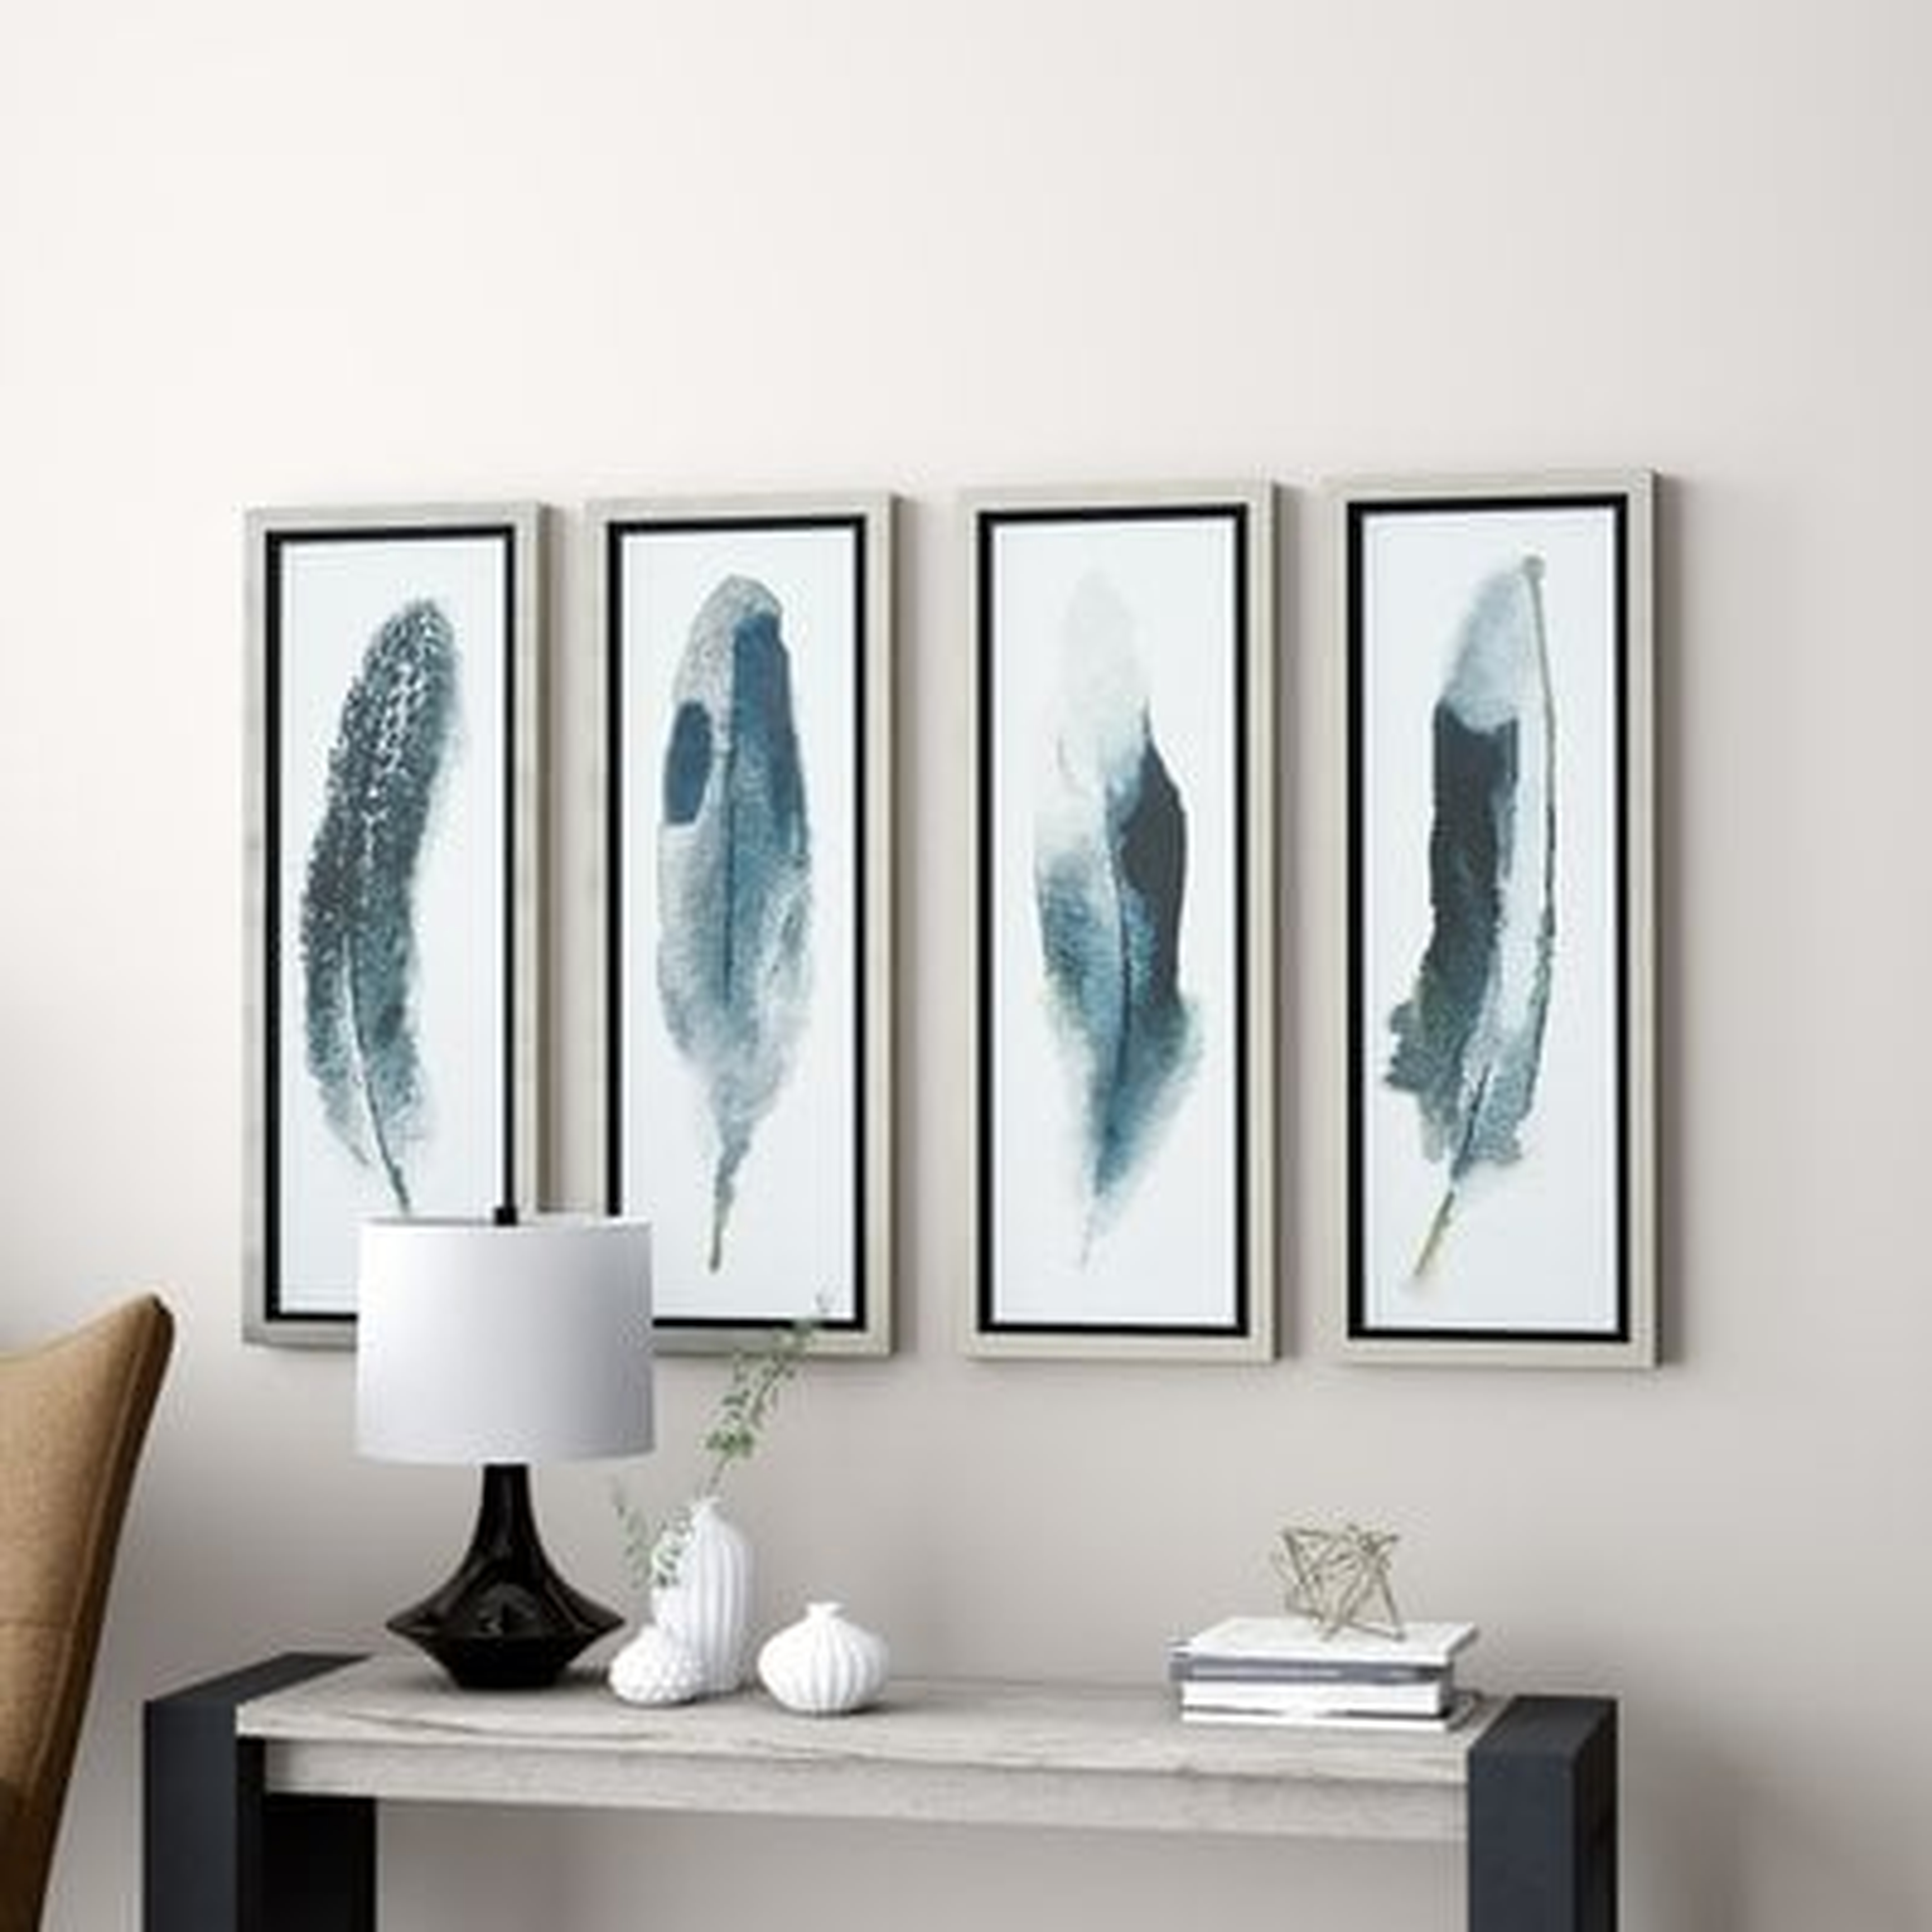 'Feathered Beauty Prints' 4 Piece Picture Frame Painting Set on Glass - Birch Lane